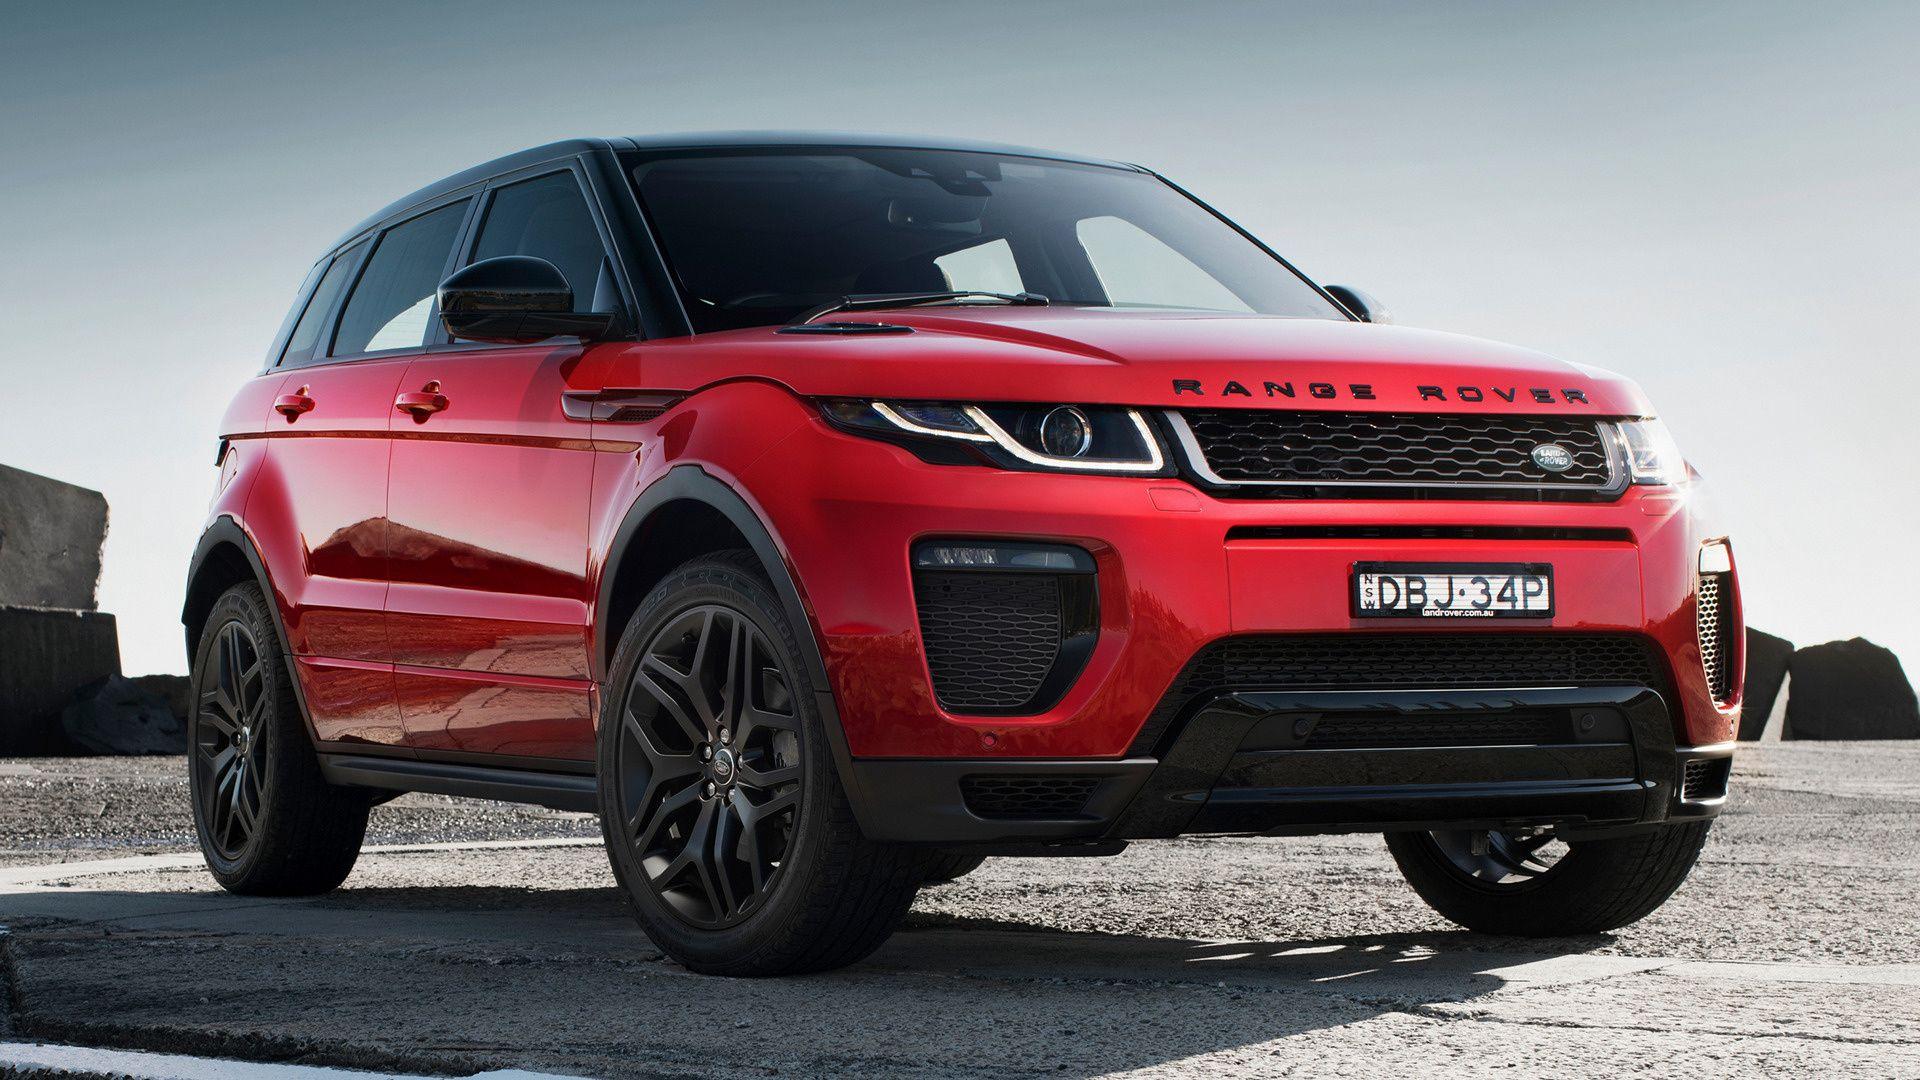 Range Rover Evoque HSE Dynamic (2015) AU Wallpaper and HD Image